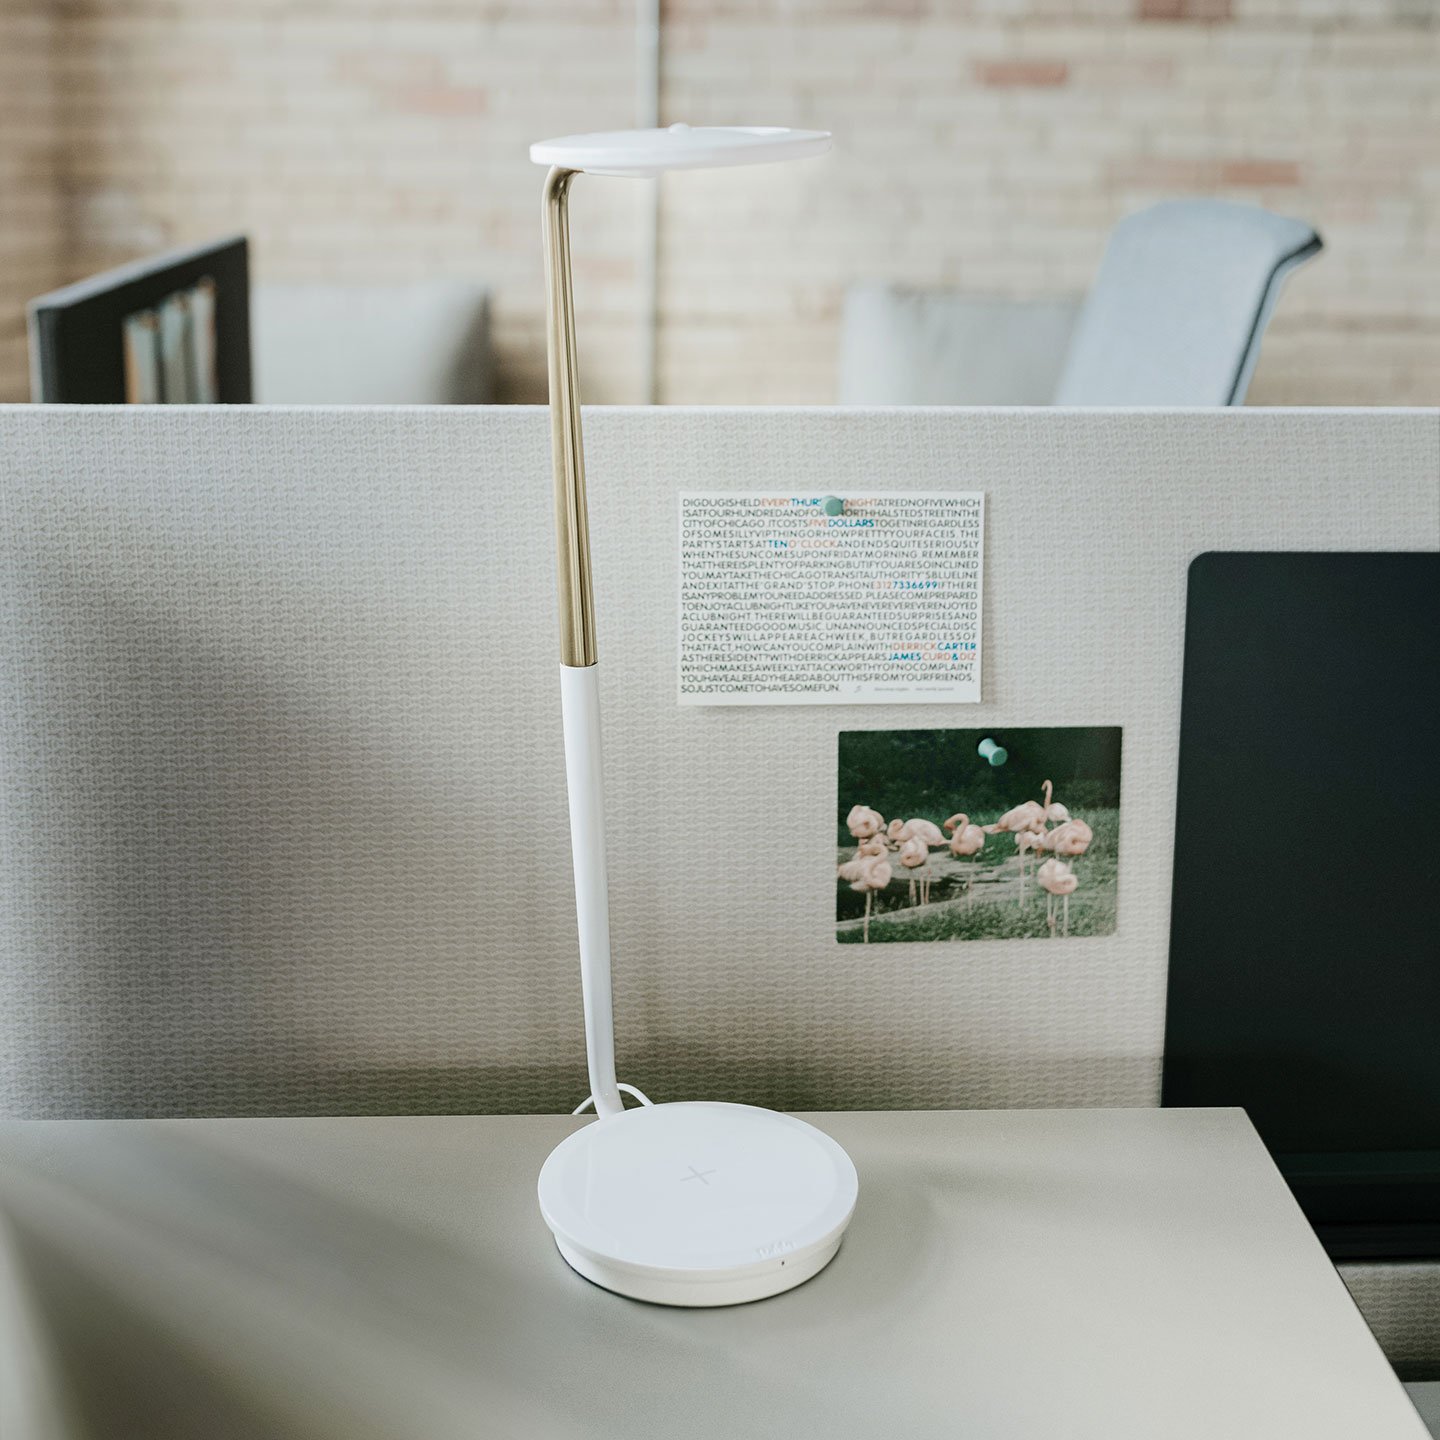 Haworth Pixo Plus Lighting in white color on office desk with white divider